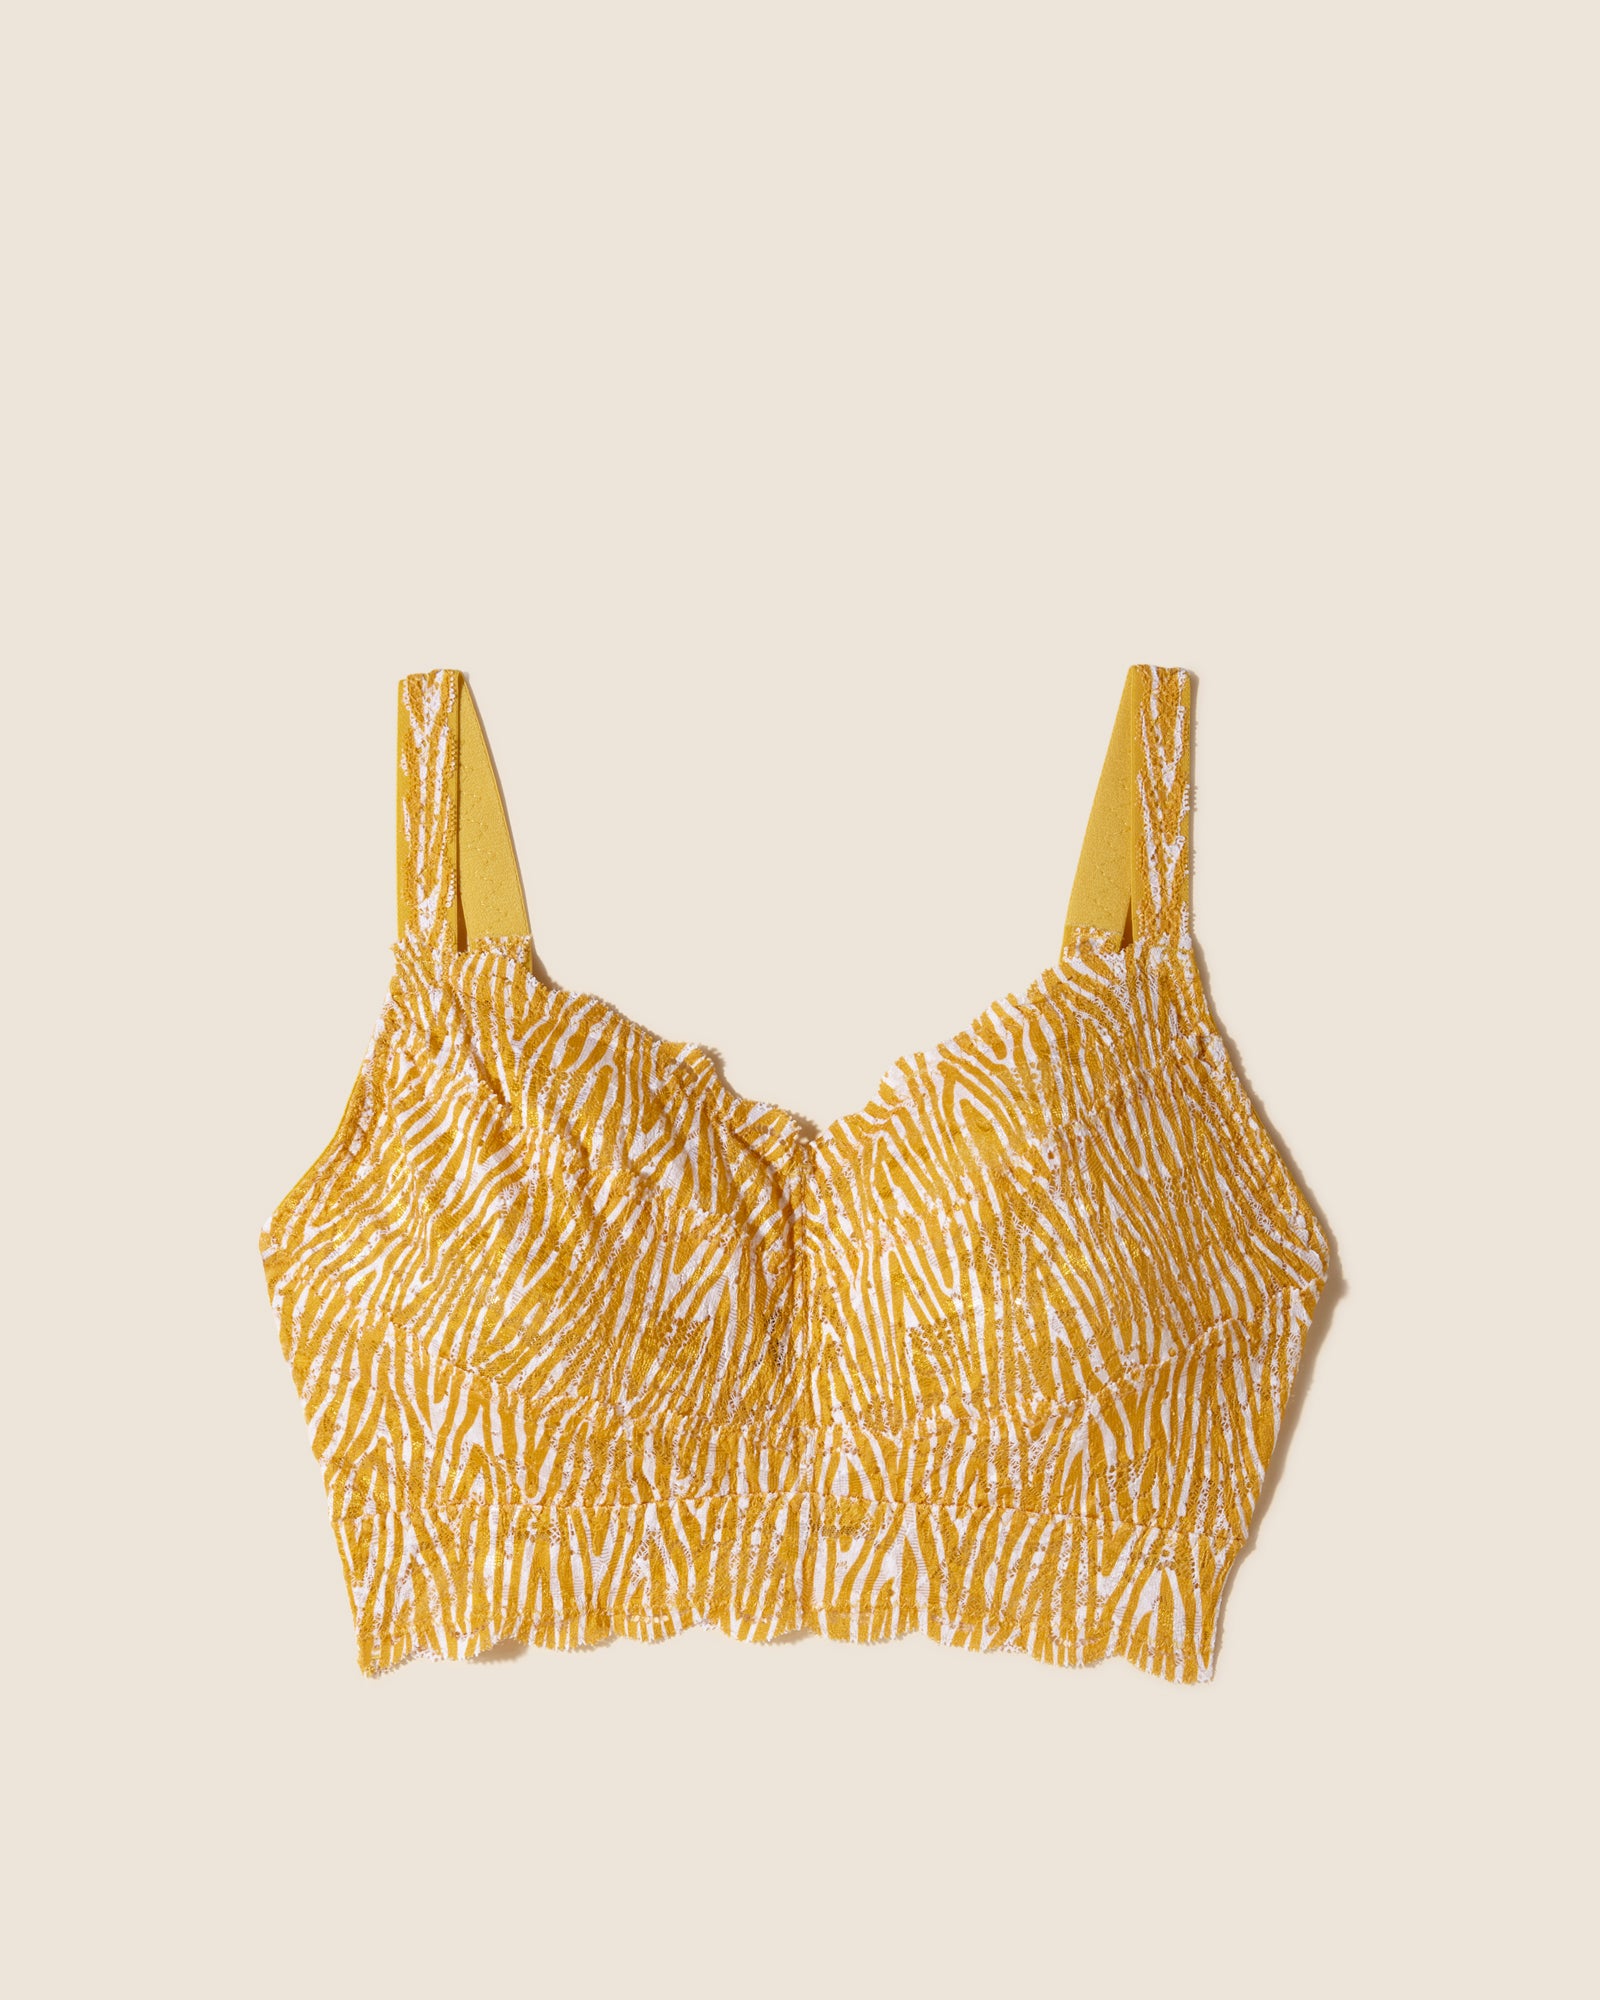 Cosabella Women's Never Say Never Printed Curvy Sweetie Bralette, Yellow, Large, Lace Bralette